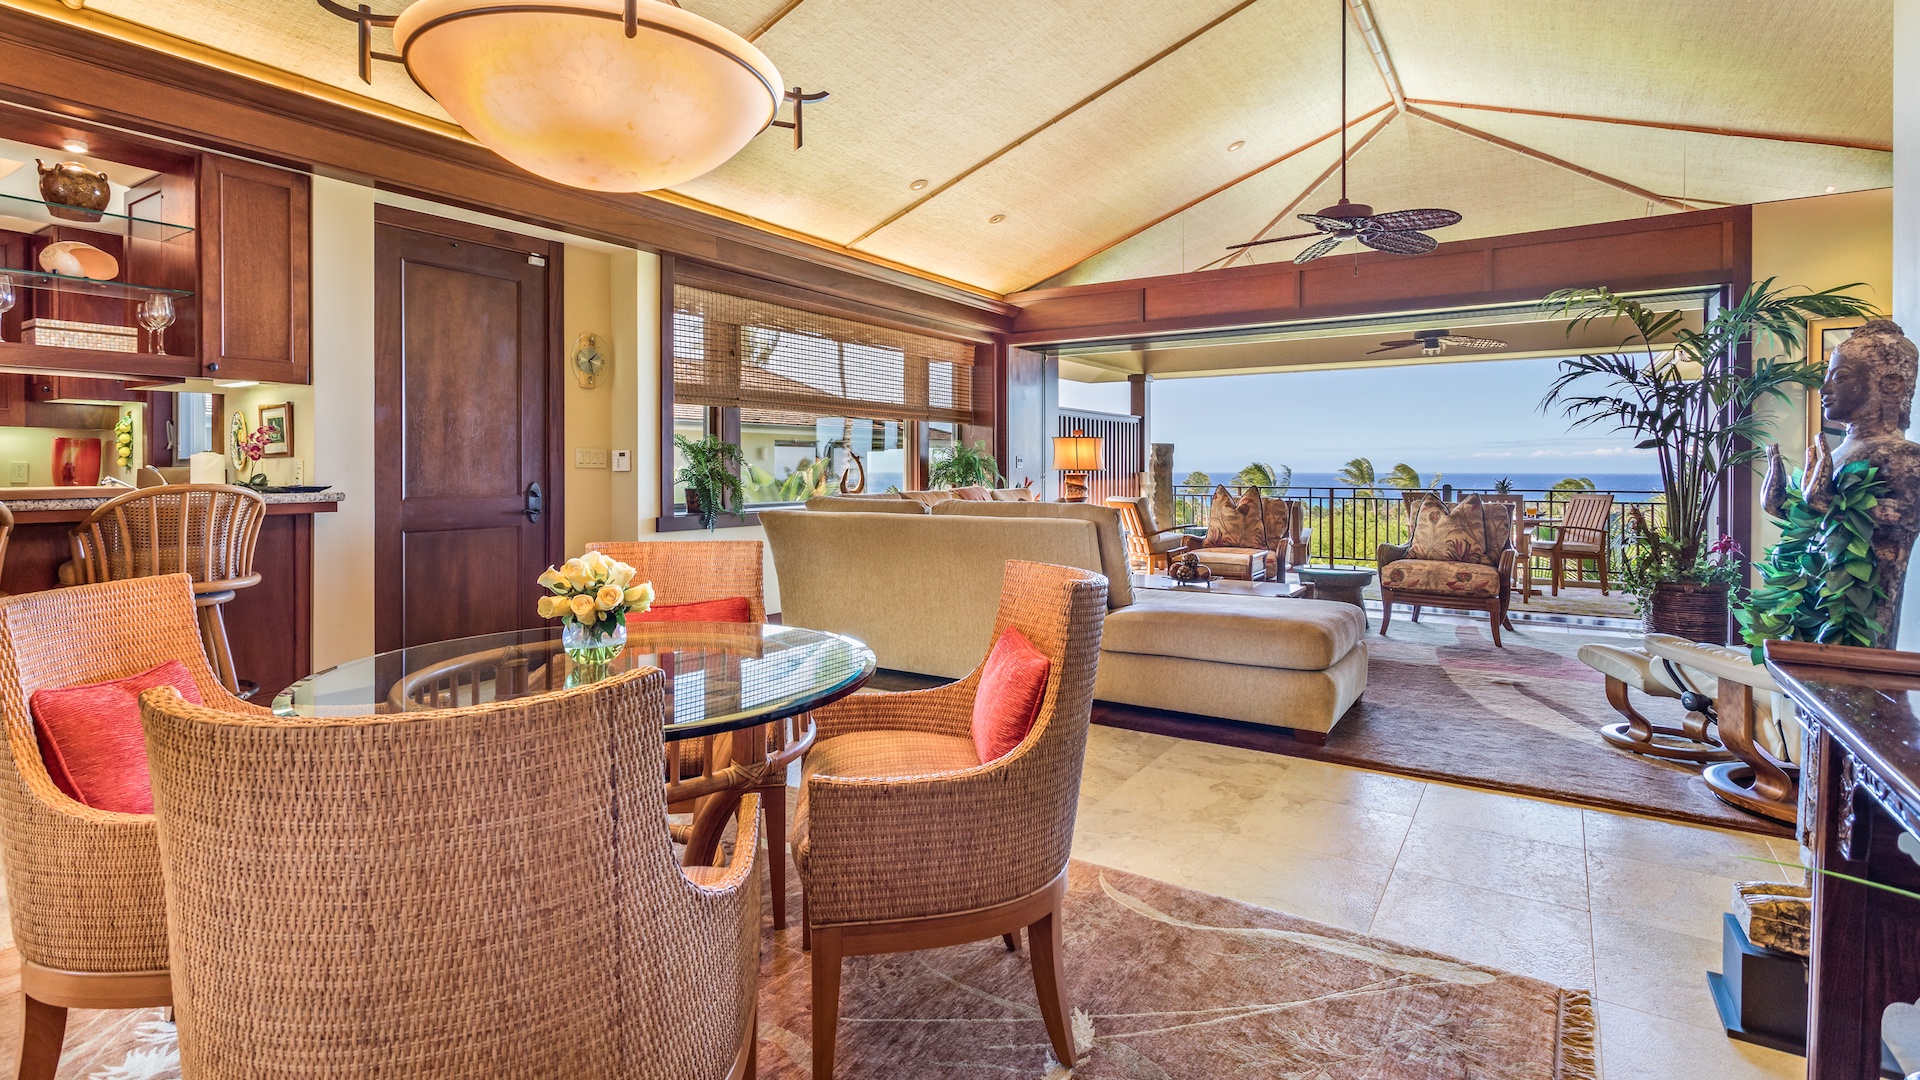 Kailua Kona Vacation Rentals, 2BD Hainoa Villa (2907B) at Four Seasons Resort at Hualalai - View from Dining Area with seating for Four toward Living Area.